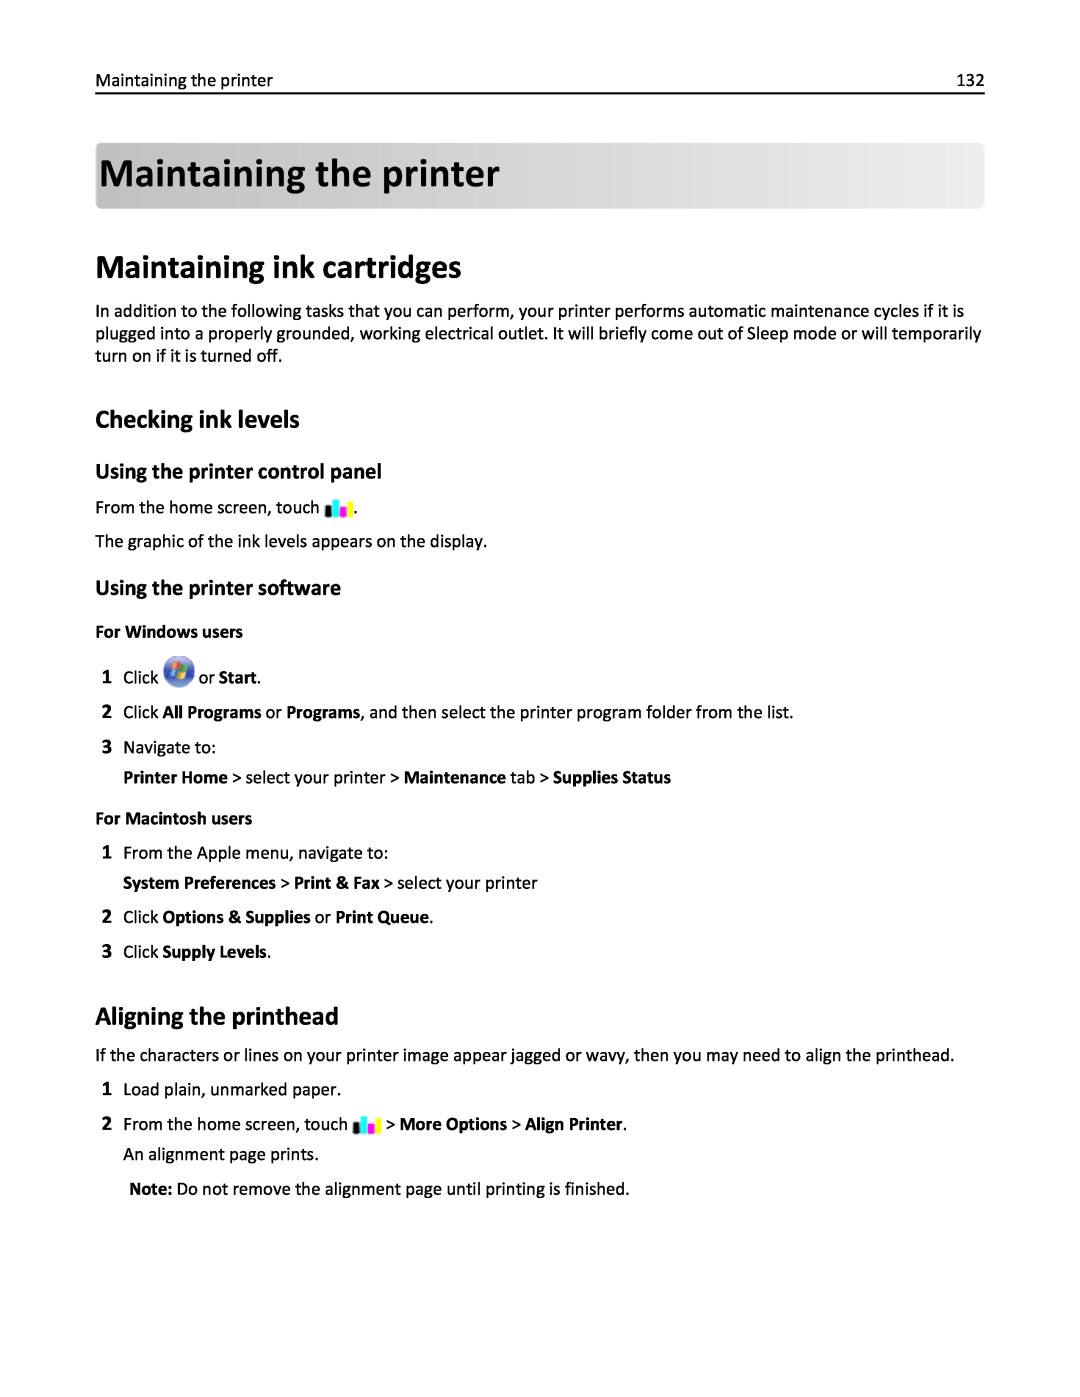 Lexmark 20E, 200 manual Maintaining the printer, Maintaining ink cartridges, Checking ink levels, Aligning the printhead 